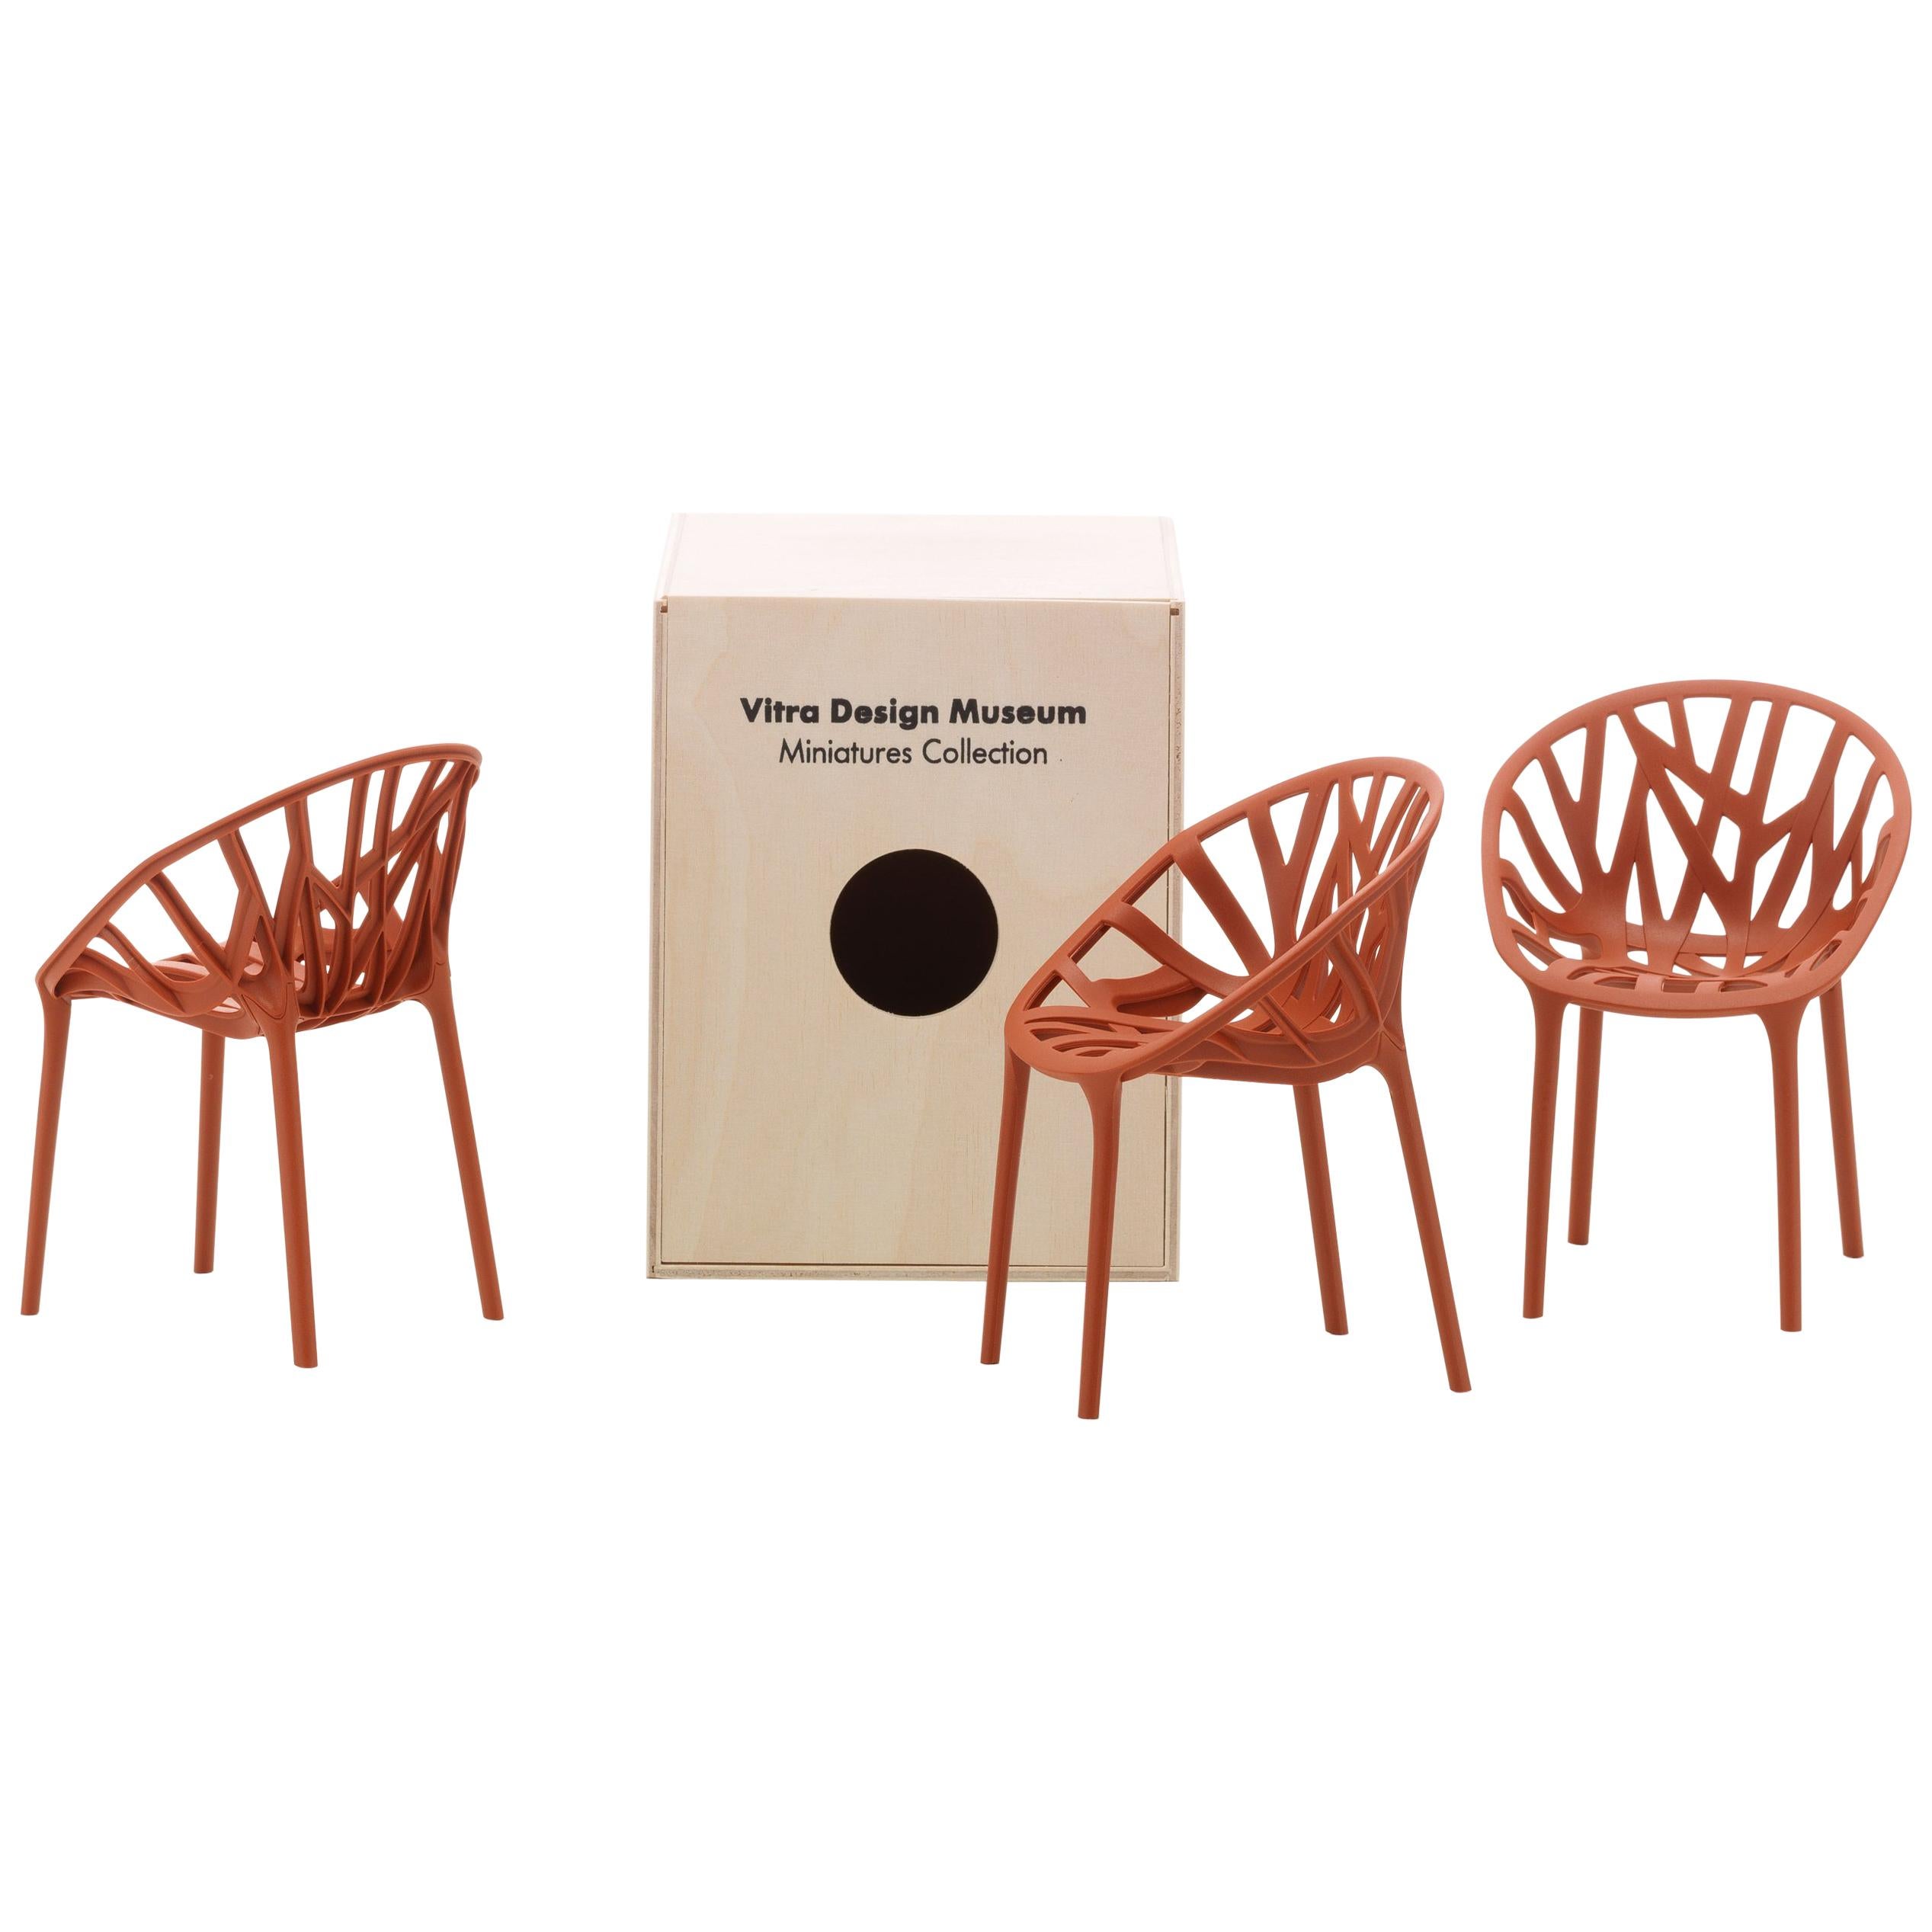 Vitra Miniature Vegetal Chairs in Brick by Ronan & Erwan Bouroullec 'Set of 3' For Sale